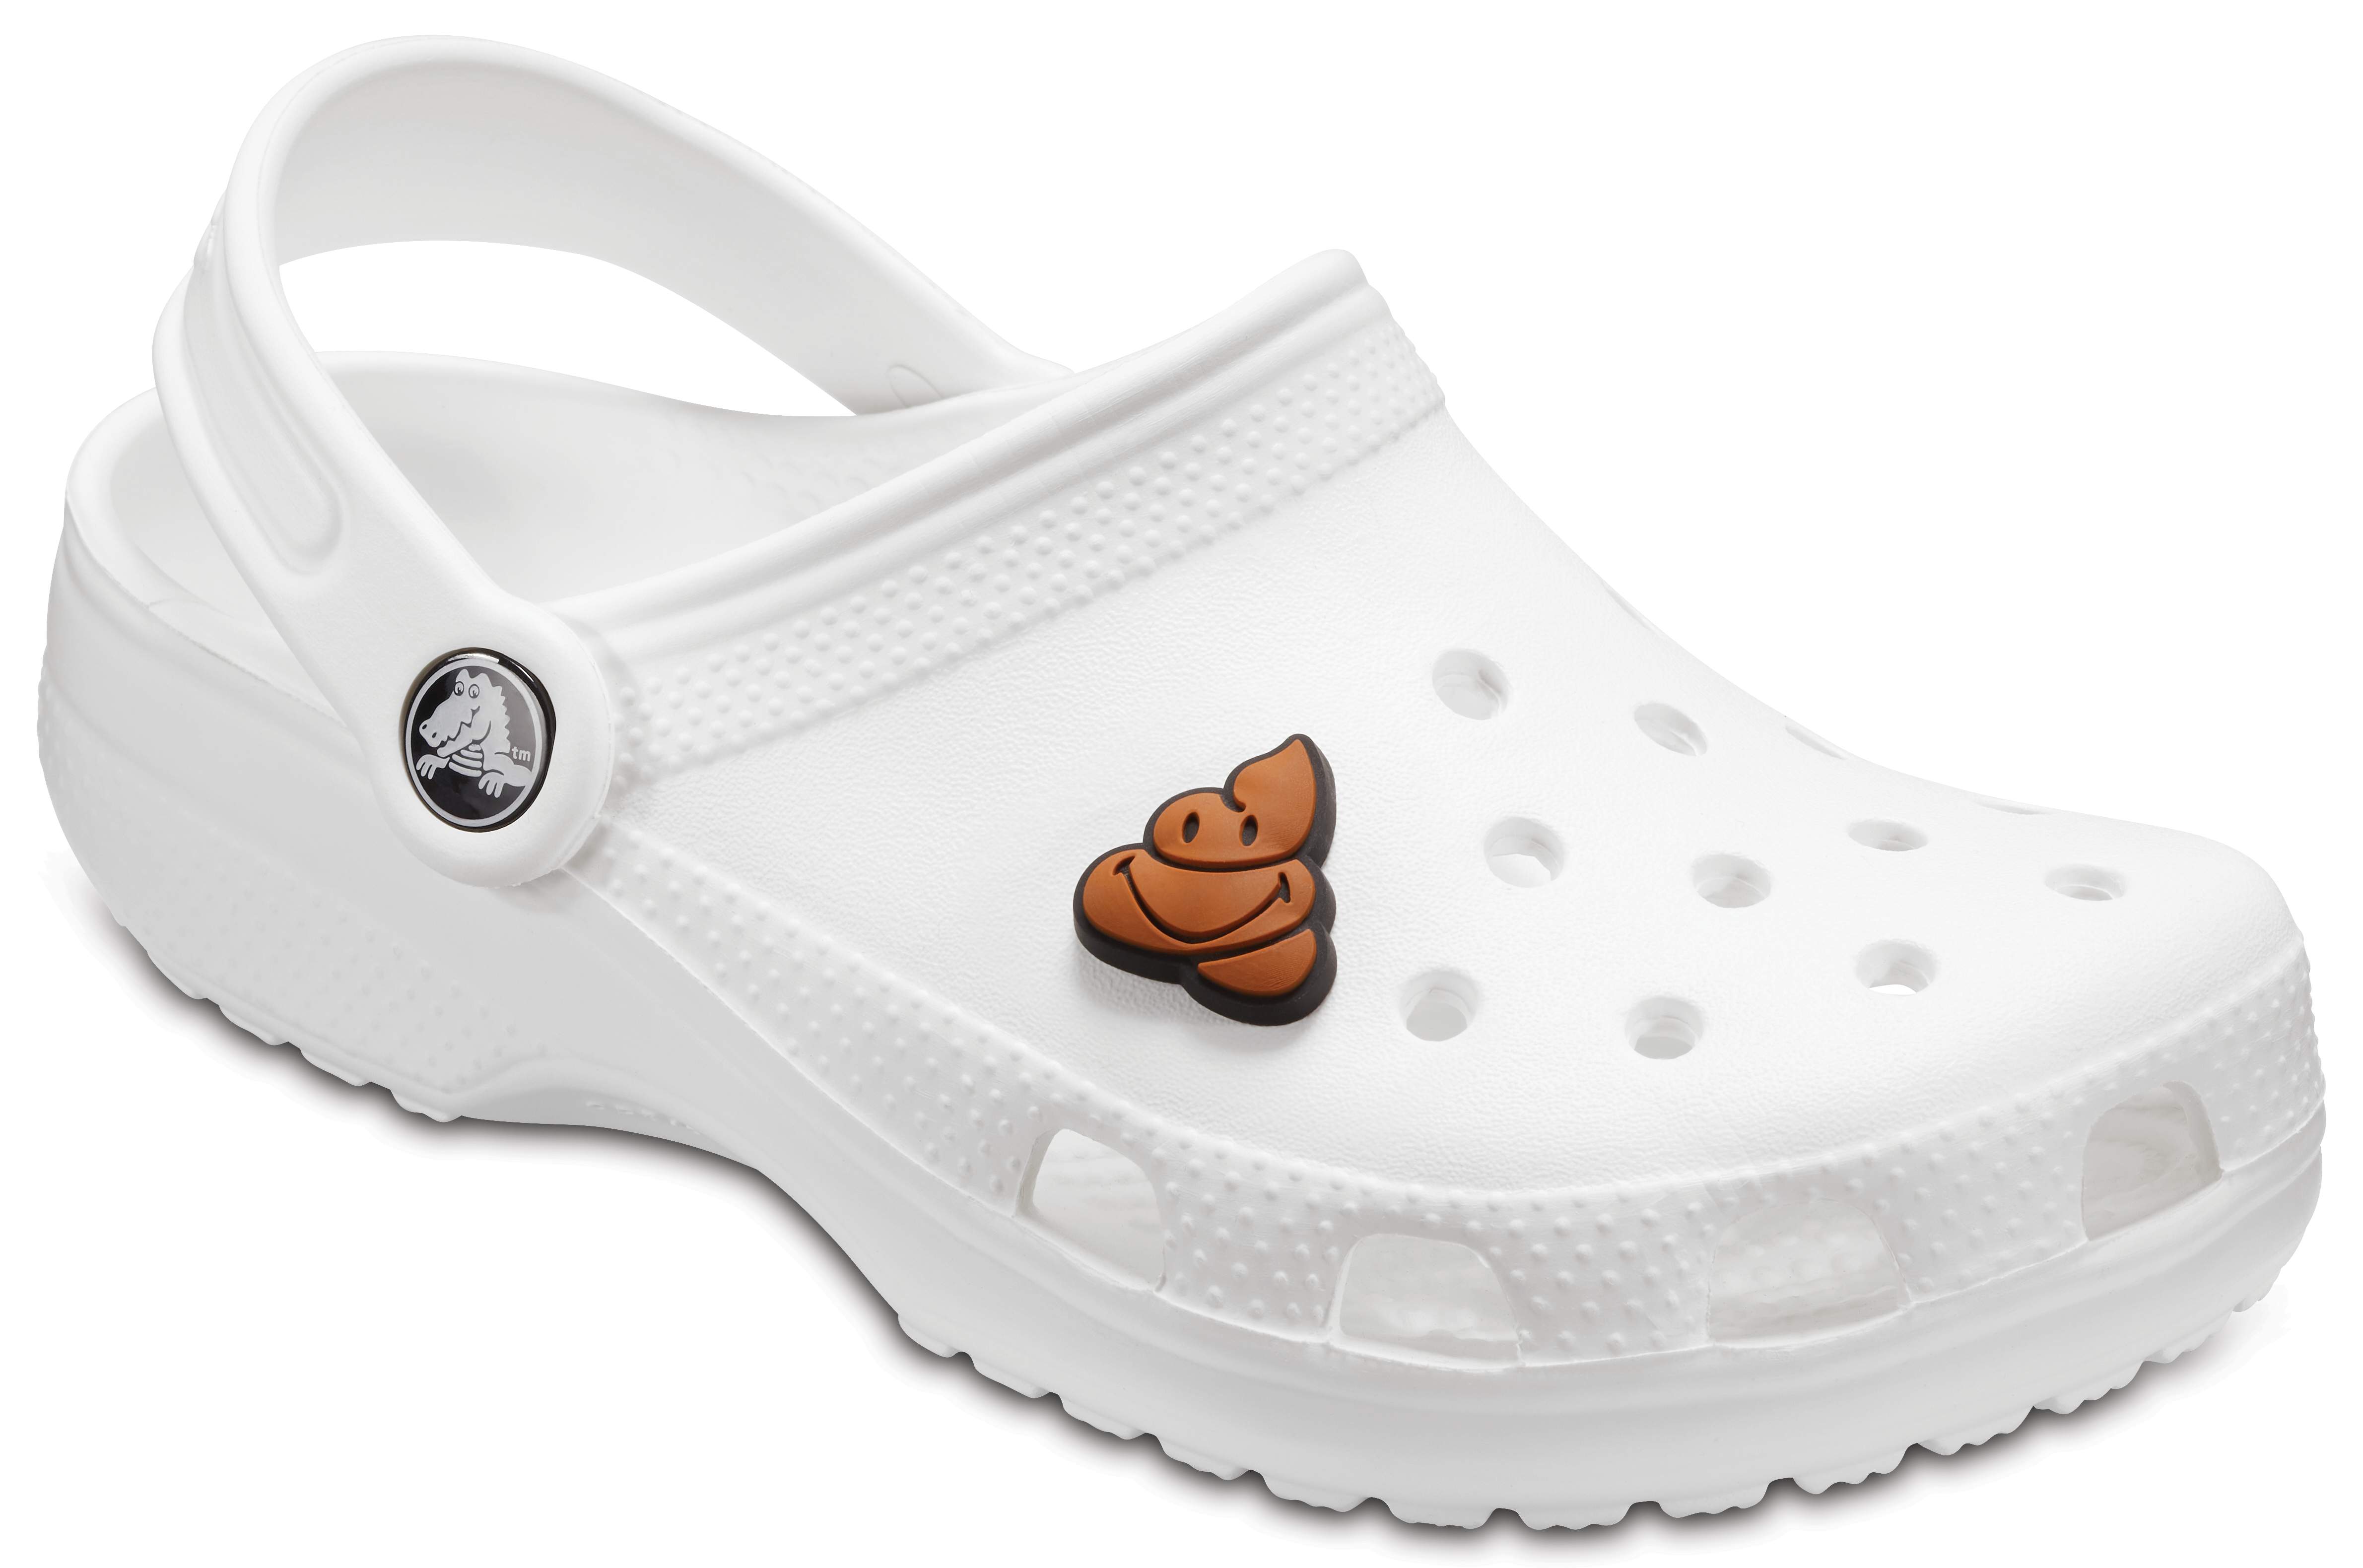 who sells crocs in store